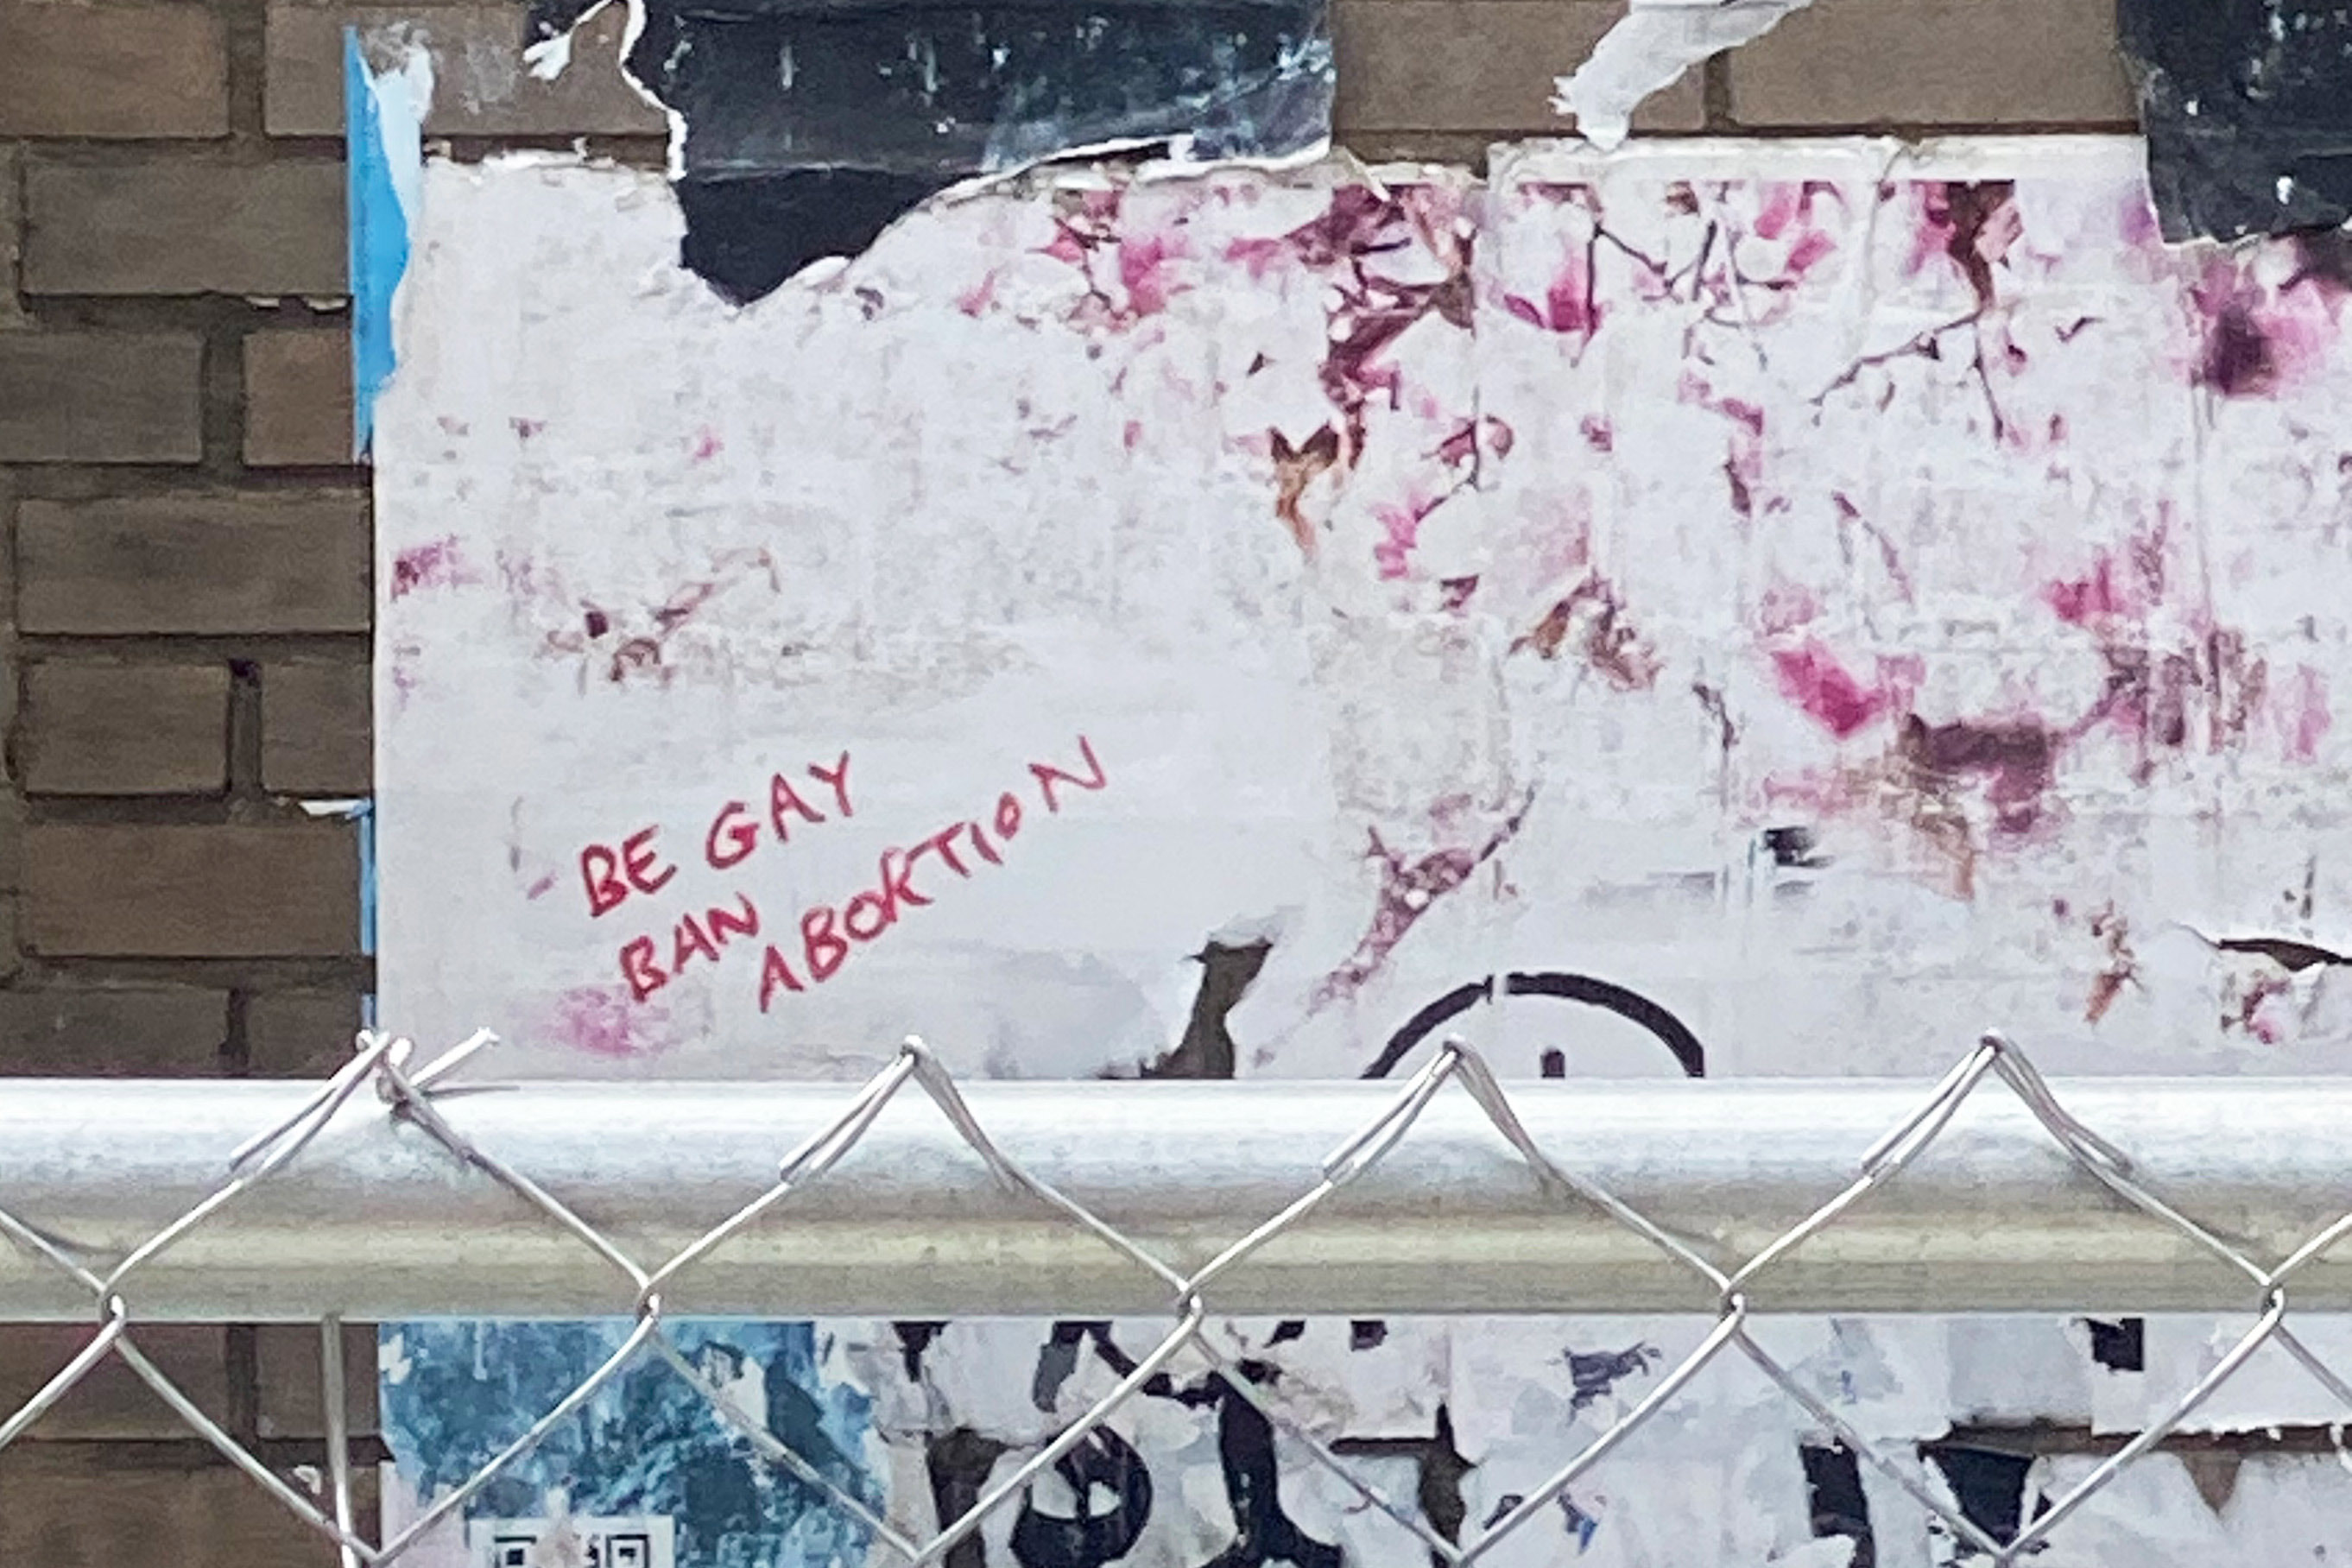 A photograph of graffiti written in red marker behind a chain-link fence. It reads, "be gay / ban abortion."